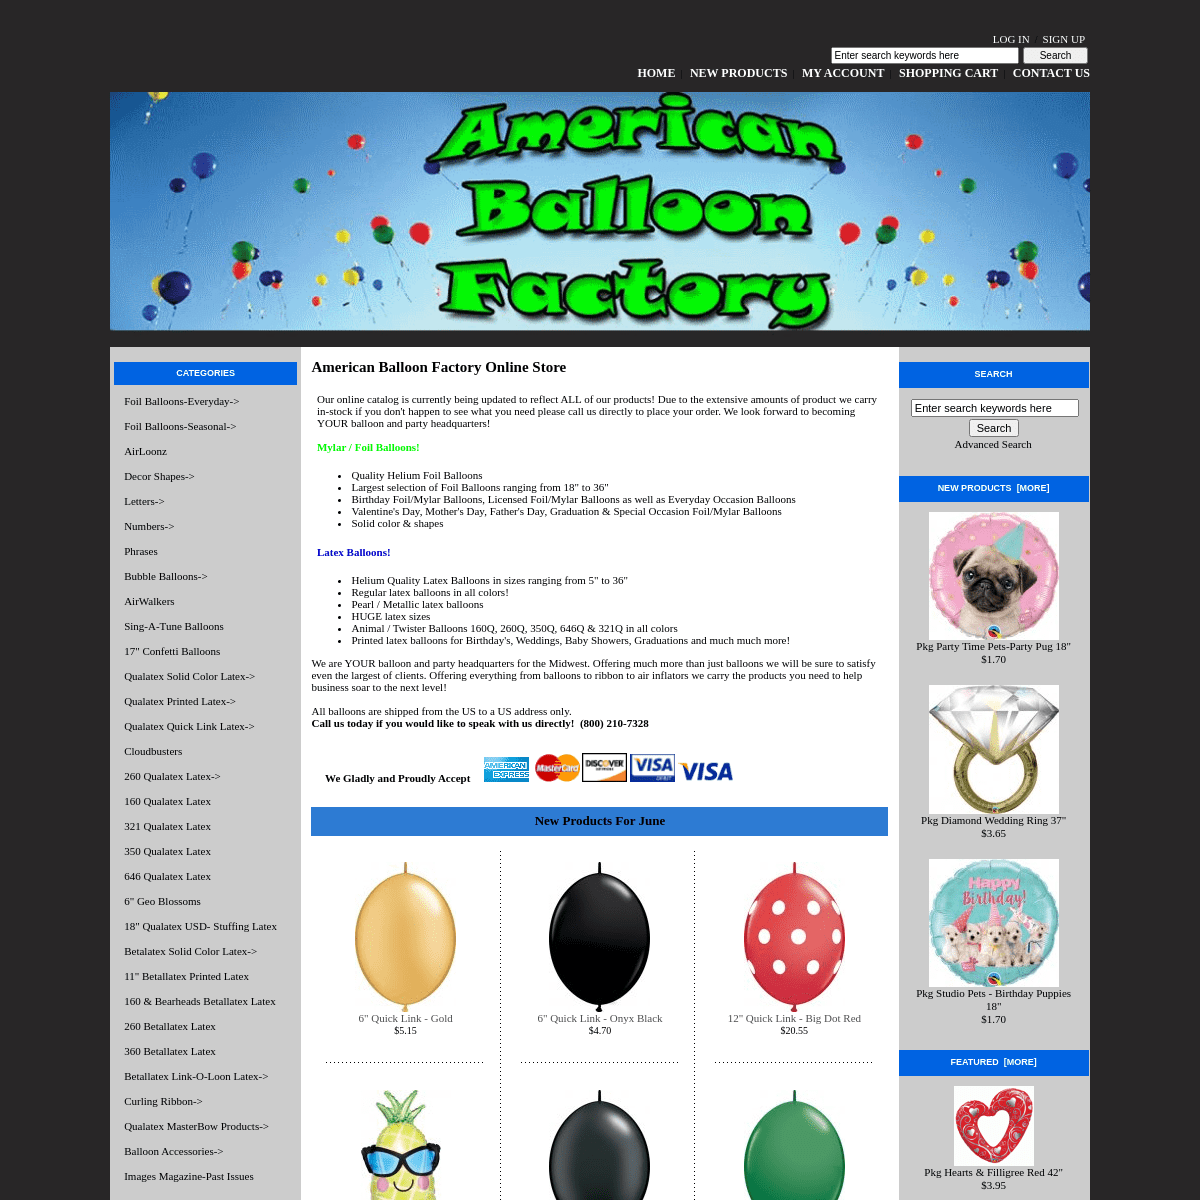 A complete backup of https://americanballoonfactory.com